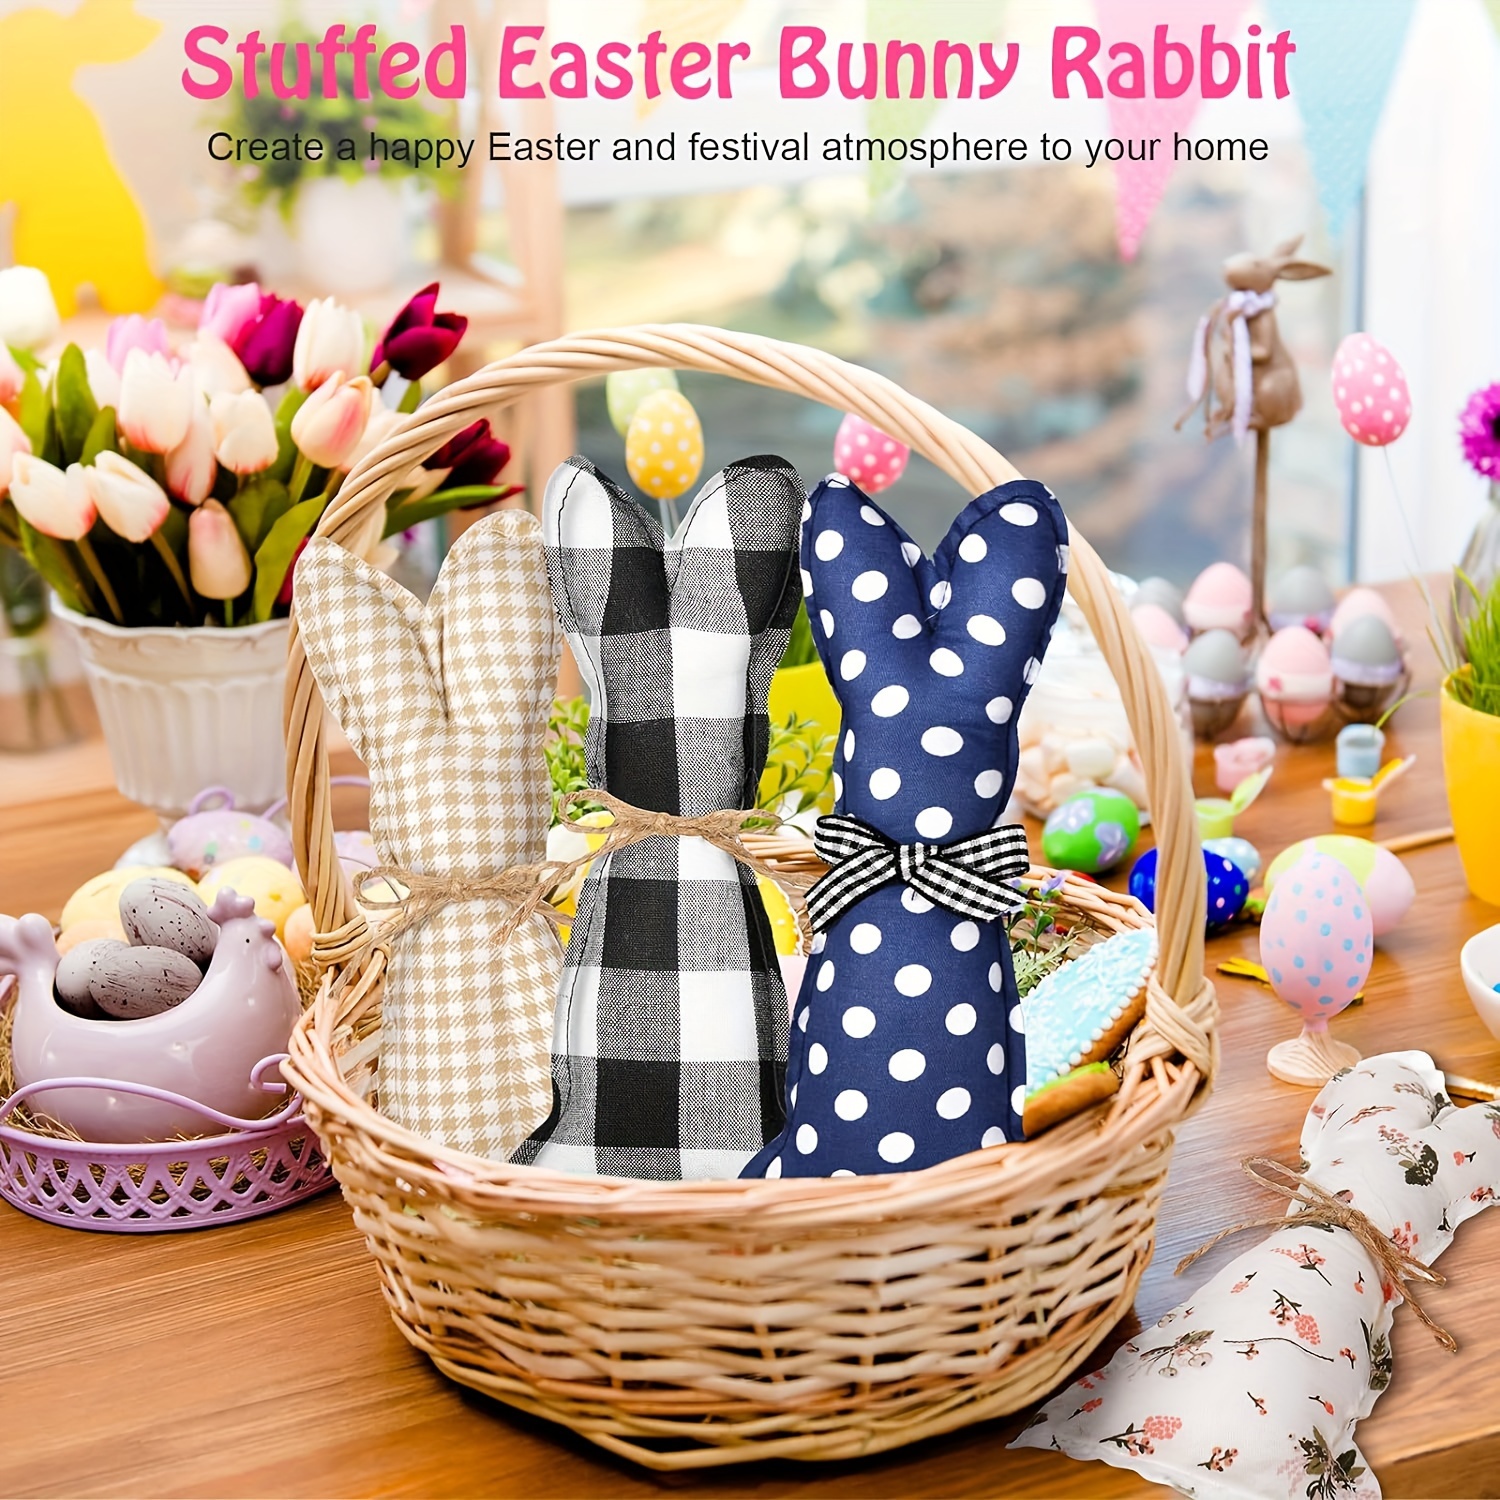 12pcs stuffed fabric bunnies easter table top rustic farmhouse decor plush carrot bunny decor rabbit decor tall vase filler decor for desk counter tiered tray wedding home exquisite soft craft